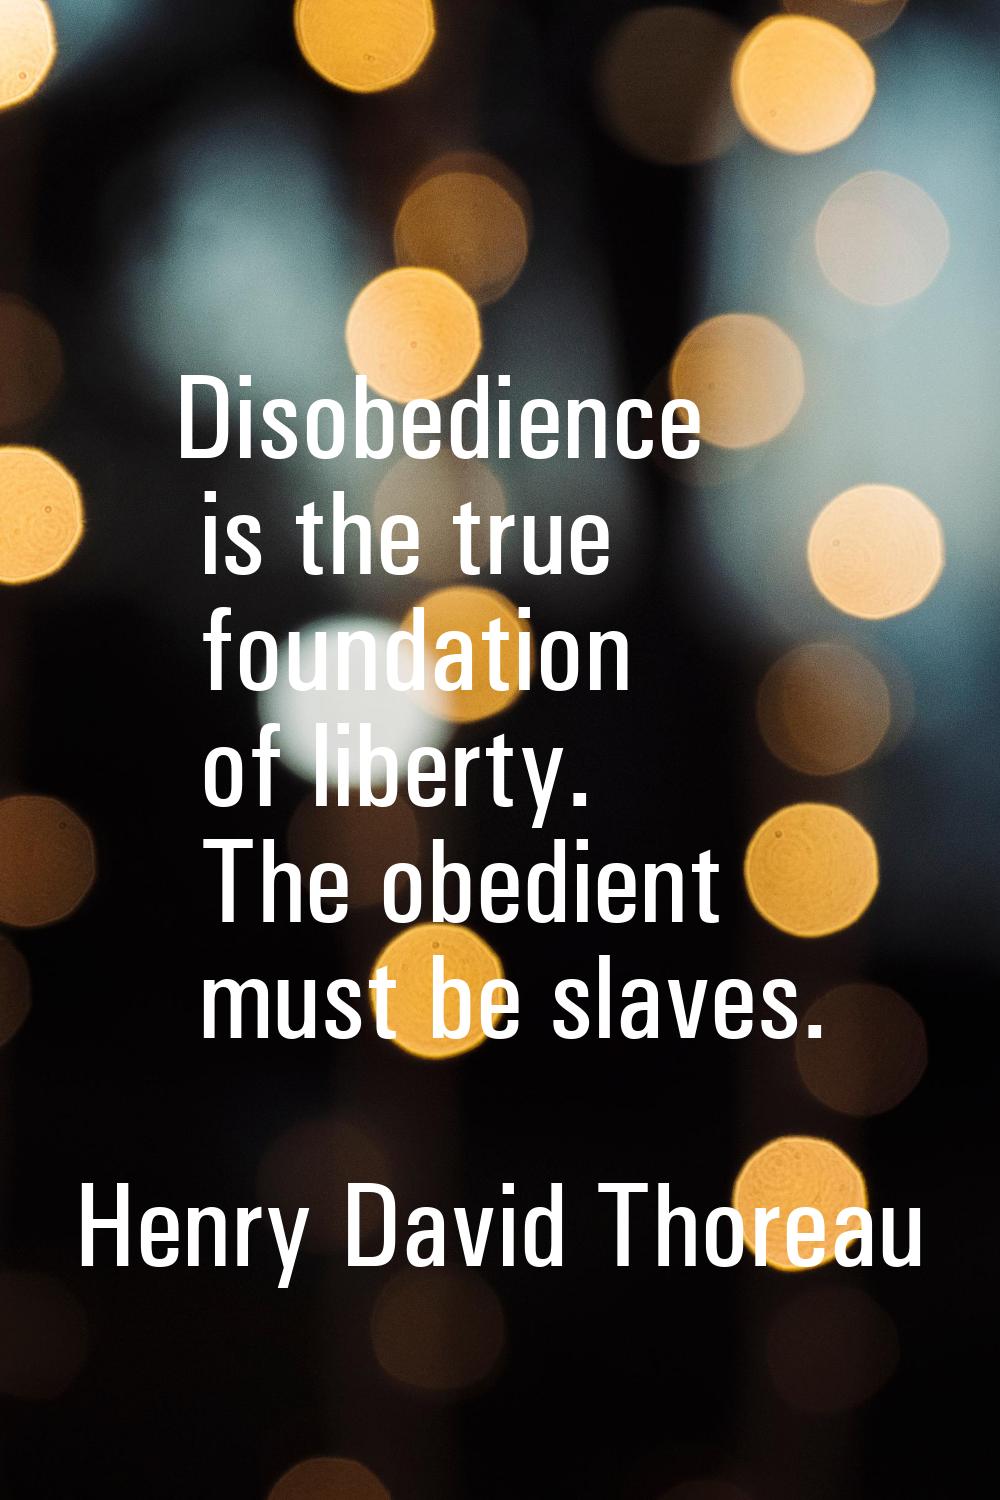 Disobedience is the true foundation of liberty. The obedient must be slaves.